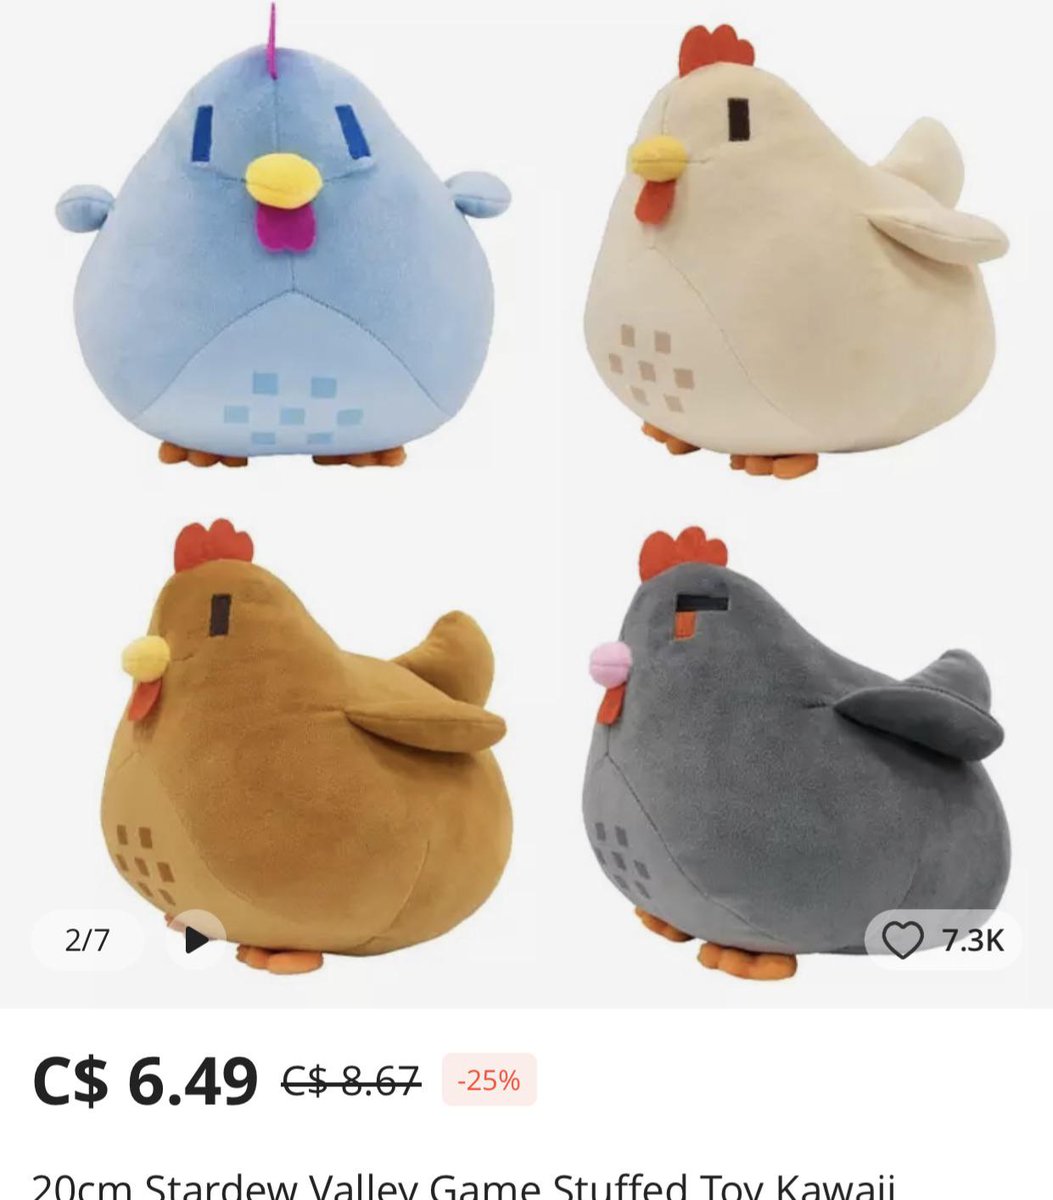 Just wanted y’all to know you can live out your stardew chicken plush dreams.. posted by u/justgivemesnacks. Post url: redd.it/x0914y #StardewValley #Stardew